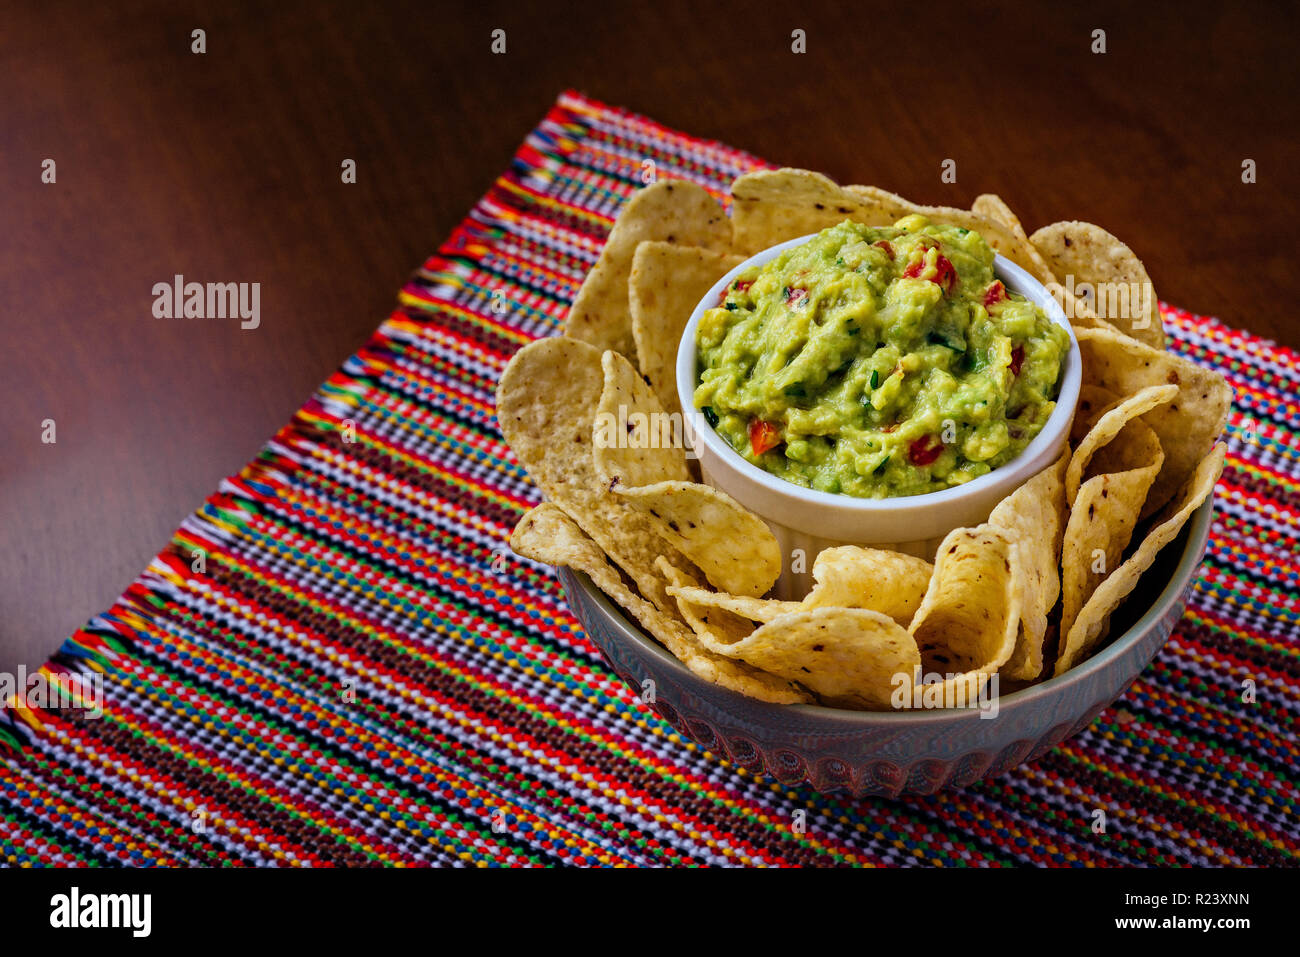 Corn nacho chips and avocado guacamole dipping sauce in a bowl over a table Stock Photo